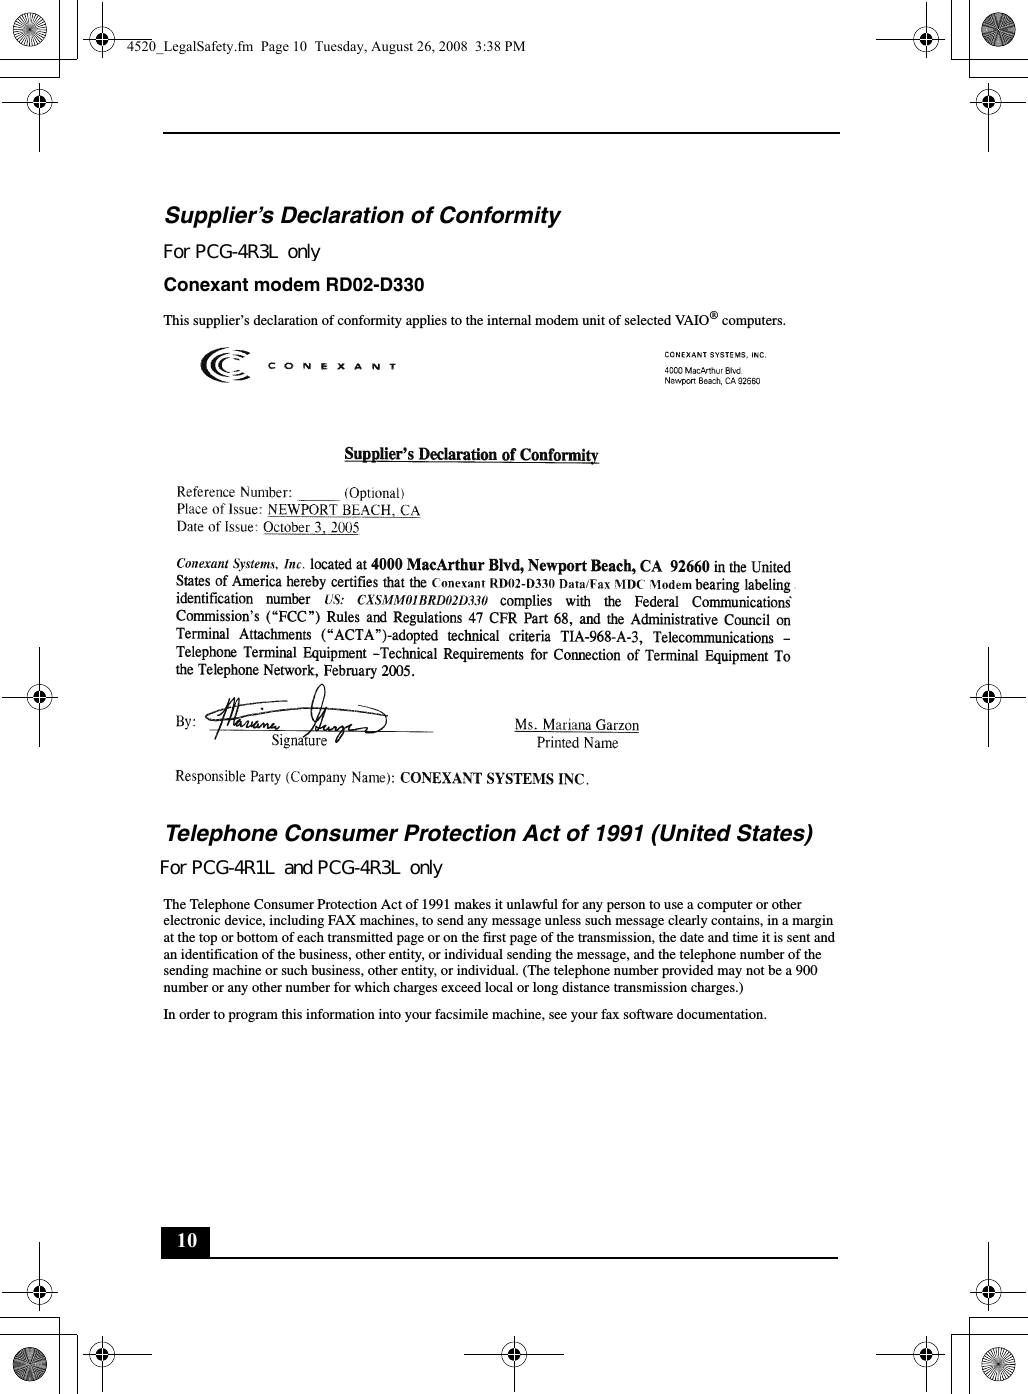 10Supplier’s Declaration of ConformityFor PCG-4Q4L onlyConexant modem RD02-D330This supplier’s declaration of conformity applies to the internal modem unit of selected VAIO® computers.Telephone Consumer Protection Act of 1991 (United States) For PCG-4Q4L onlyThe Telephone Consumer Protection Act of 1991 makes it unlawful for any person to use a computer or other electronic device, including FAX machines, to send any message unless such message clearly contains, in a margin at the top or bottom of each transmitted page or on the first page of the transmission, the date and time it is sent and an identification of the business, other entity, or individual sending the message, and the telephone number of the sending machine or such business, other entity, or individual. (The telephone number provided may not be a 900 number or any other number for which charges exceed local or long distance transmission charges.)In order to program this information into your facsimile machine, see your fax software documentation.4520_LegalSafety.fm  Page 10  Tuesday, August 26, 2008  3:38 PMFor PCG-4R3L onlyFor PCG-4R1L and PCG-4R3L only